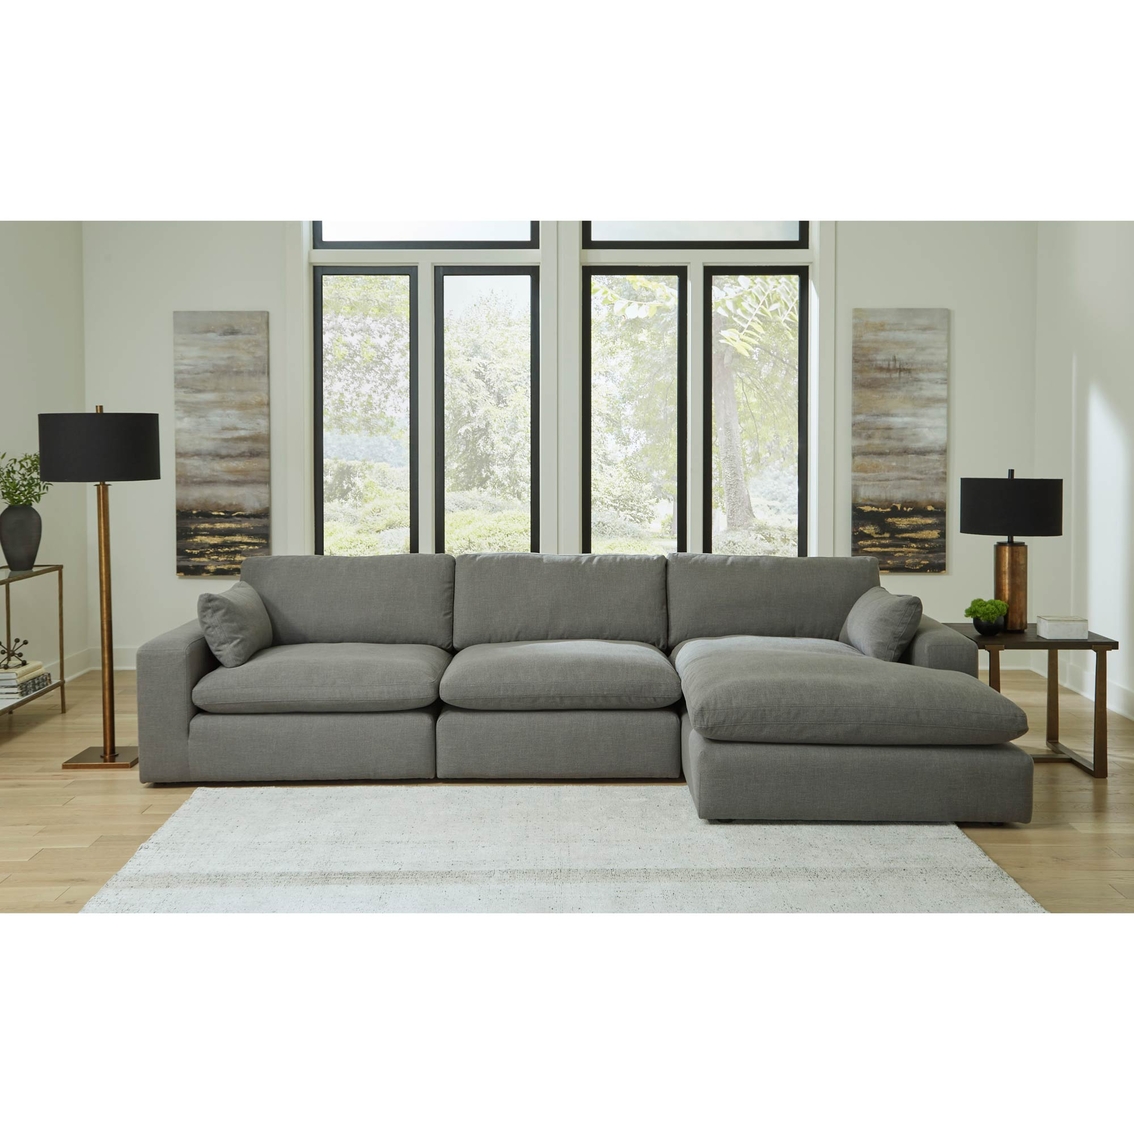 Millennium by Ashley Elyza 3 pc. Sectional with Chaise - Image 3 of 4